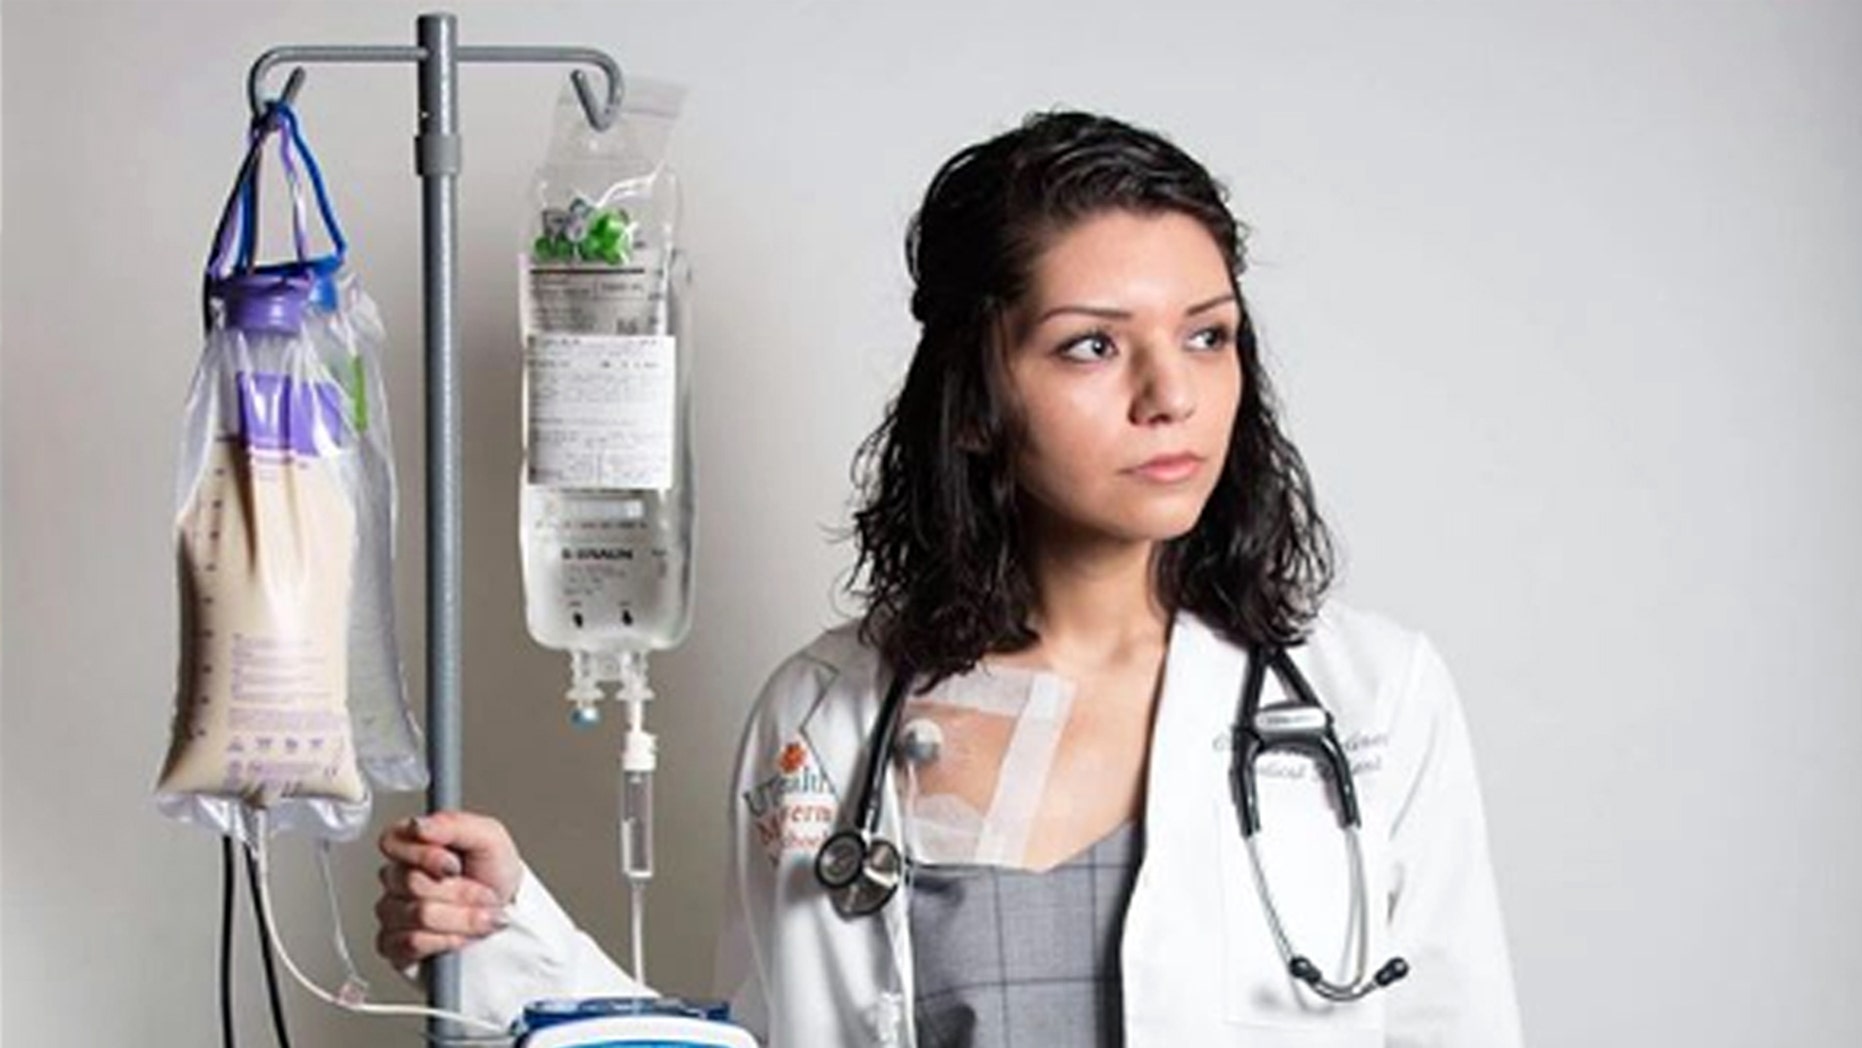 Claudia Martinez, 28, of Houston, Texas is now in her fourth year at the University of Texas Health McGovern Medical School, both as a medical student and patient.